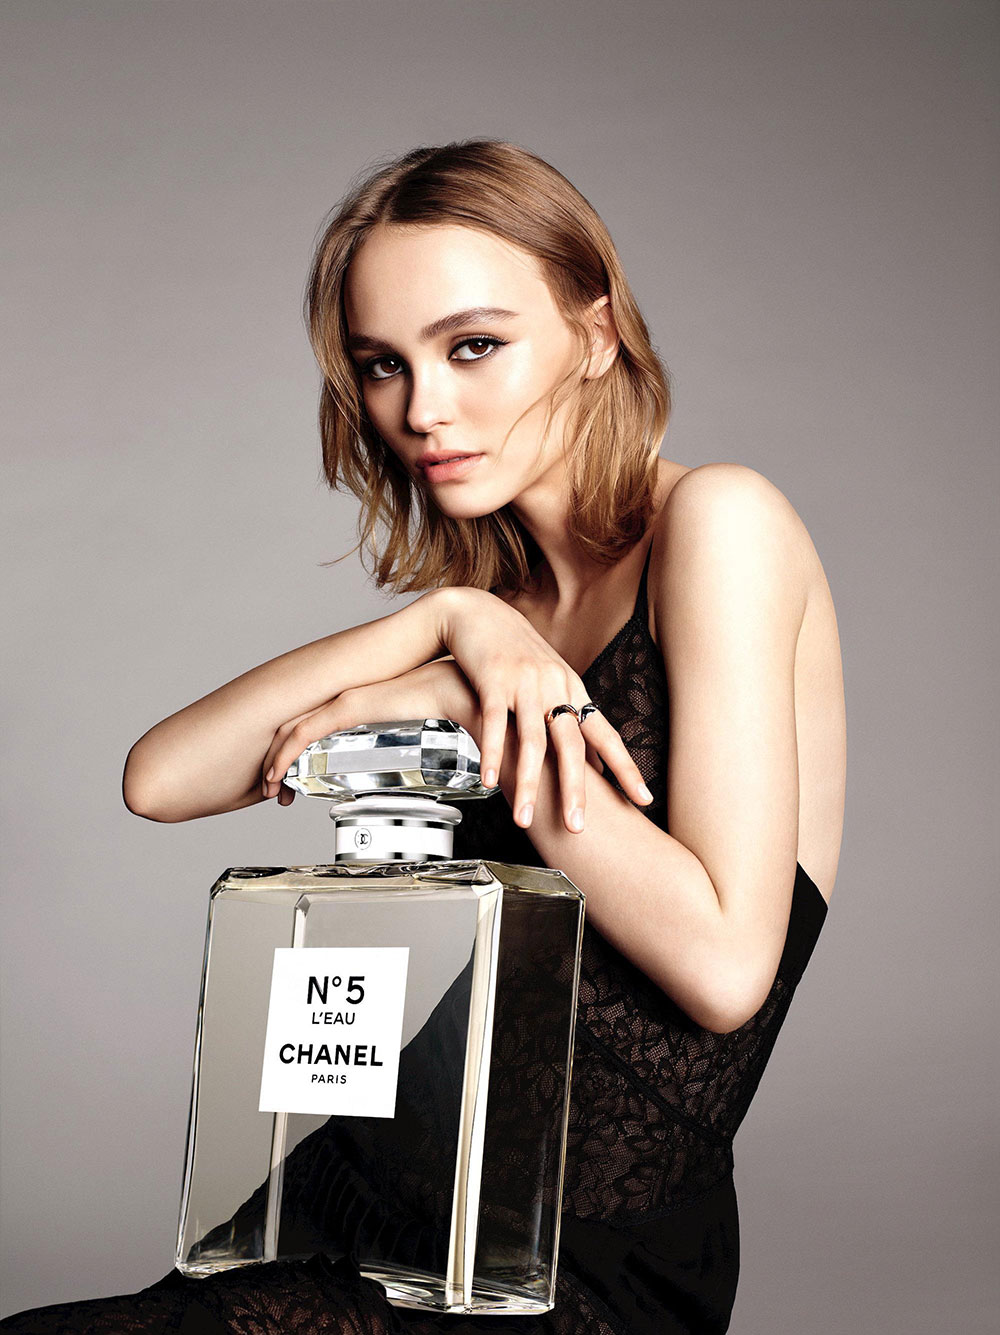 GET TO KNOW LILY-ROSE DEPP IN HER NEW CHANEL FRAGRANCE CAMPAIGN